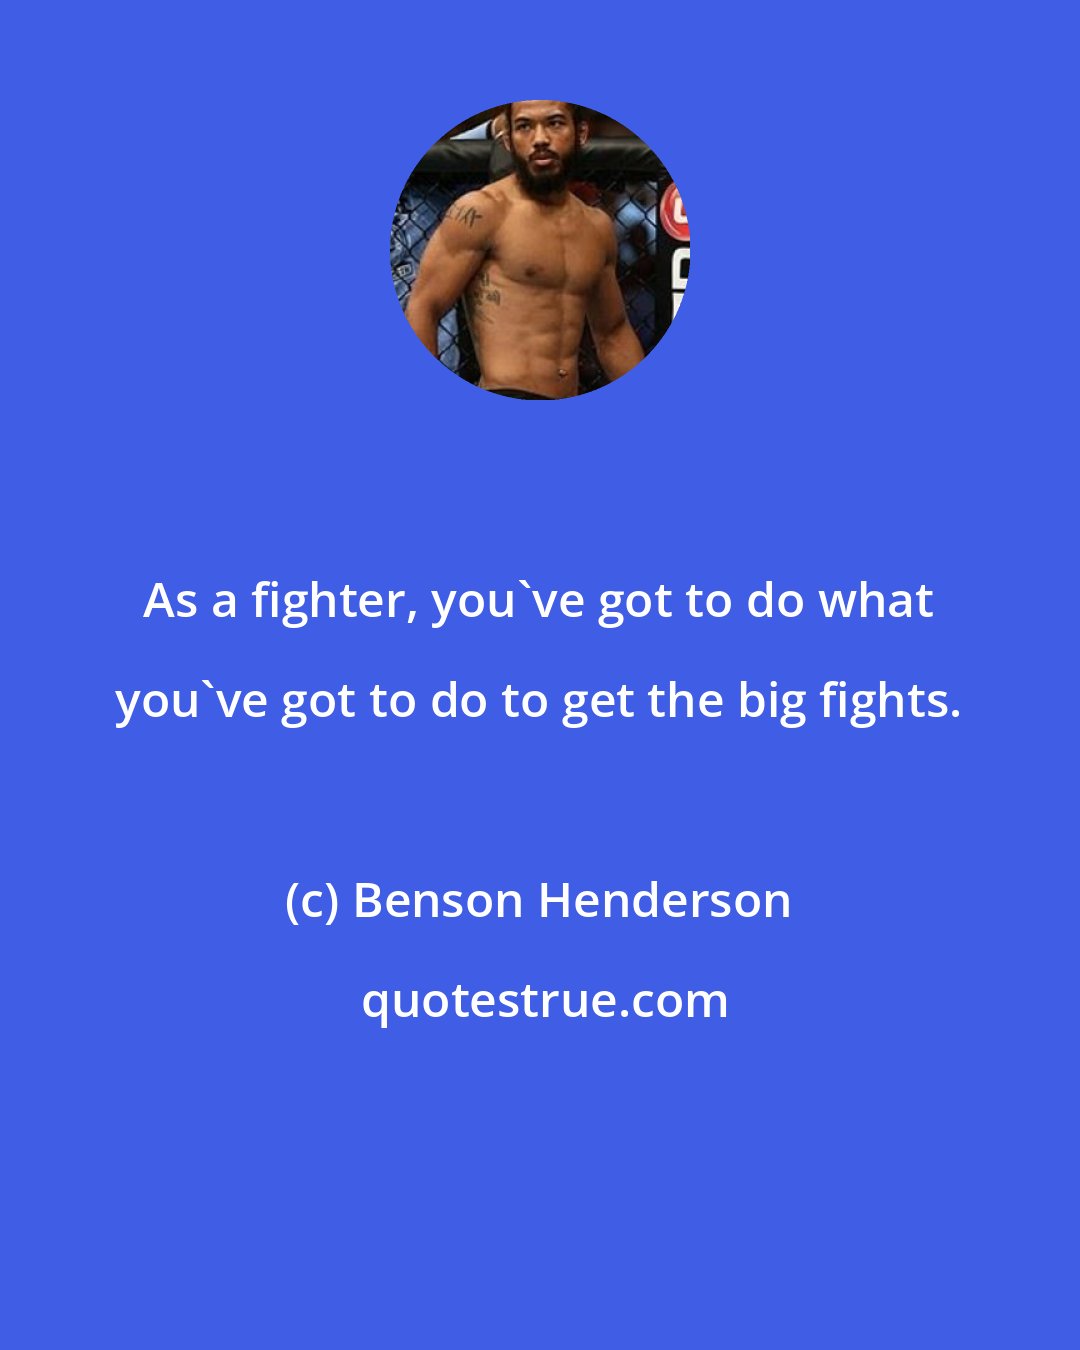 Benson Henderson: As a fighter, you've got to do what you've got to do to get the big fights.